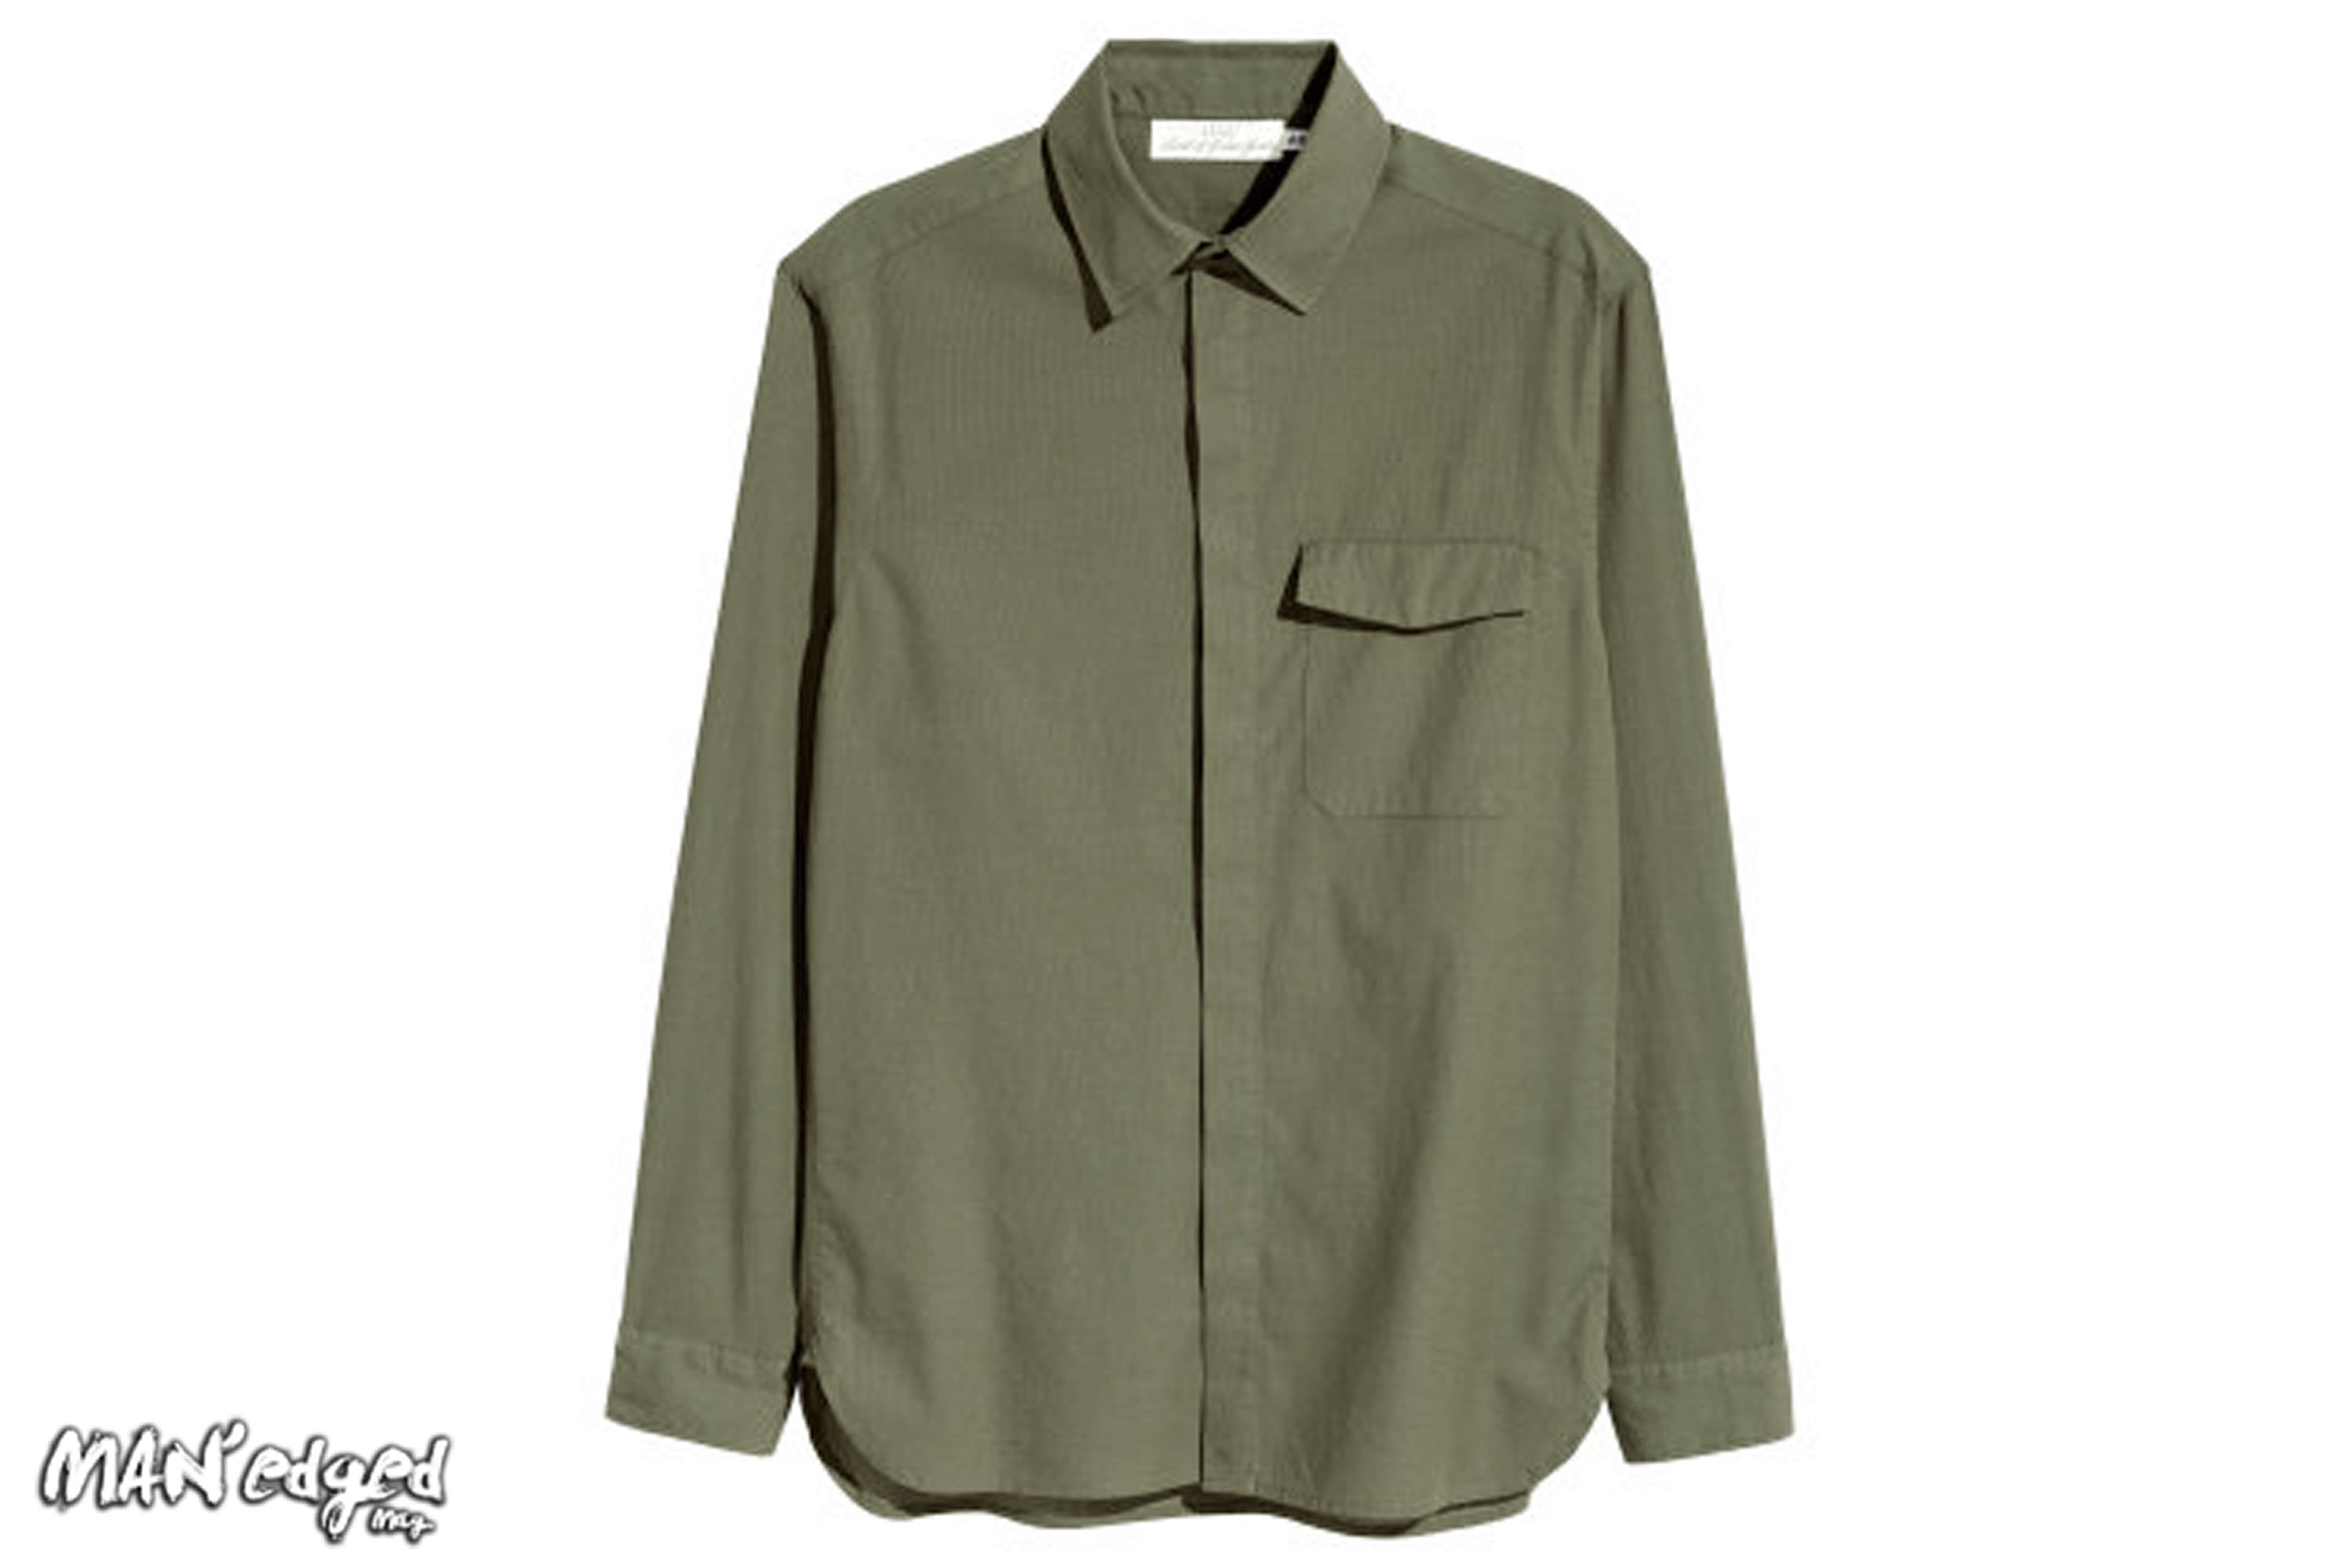 Green men's woven button up shirt from H&M, featured in MAN'edged Magazine St Patricks Day men's style round up